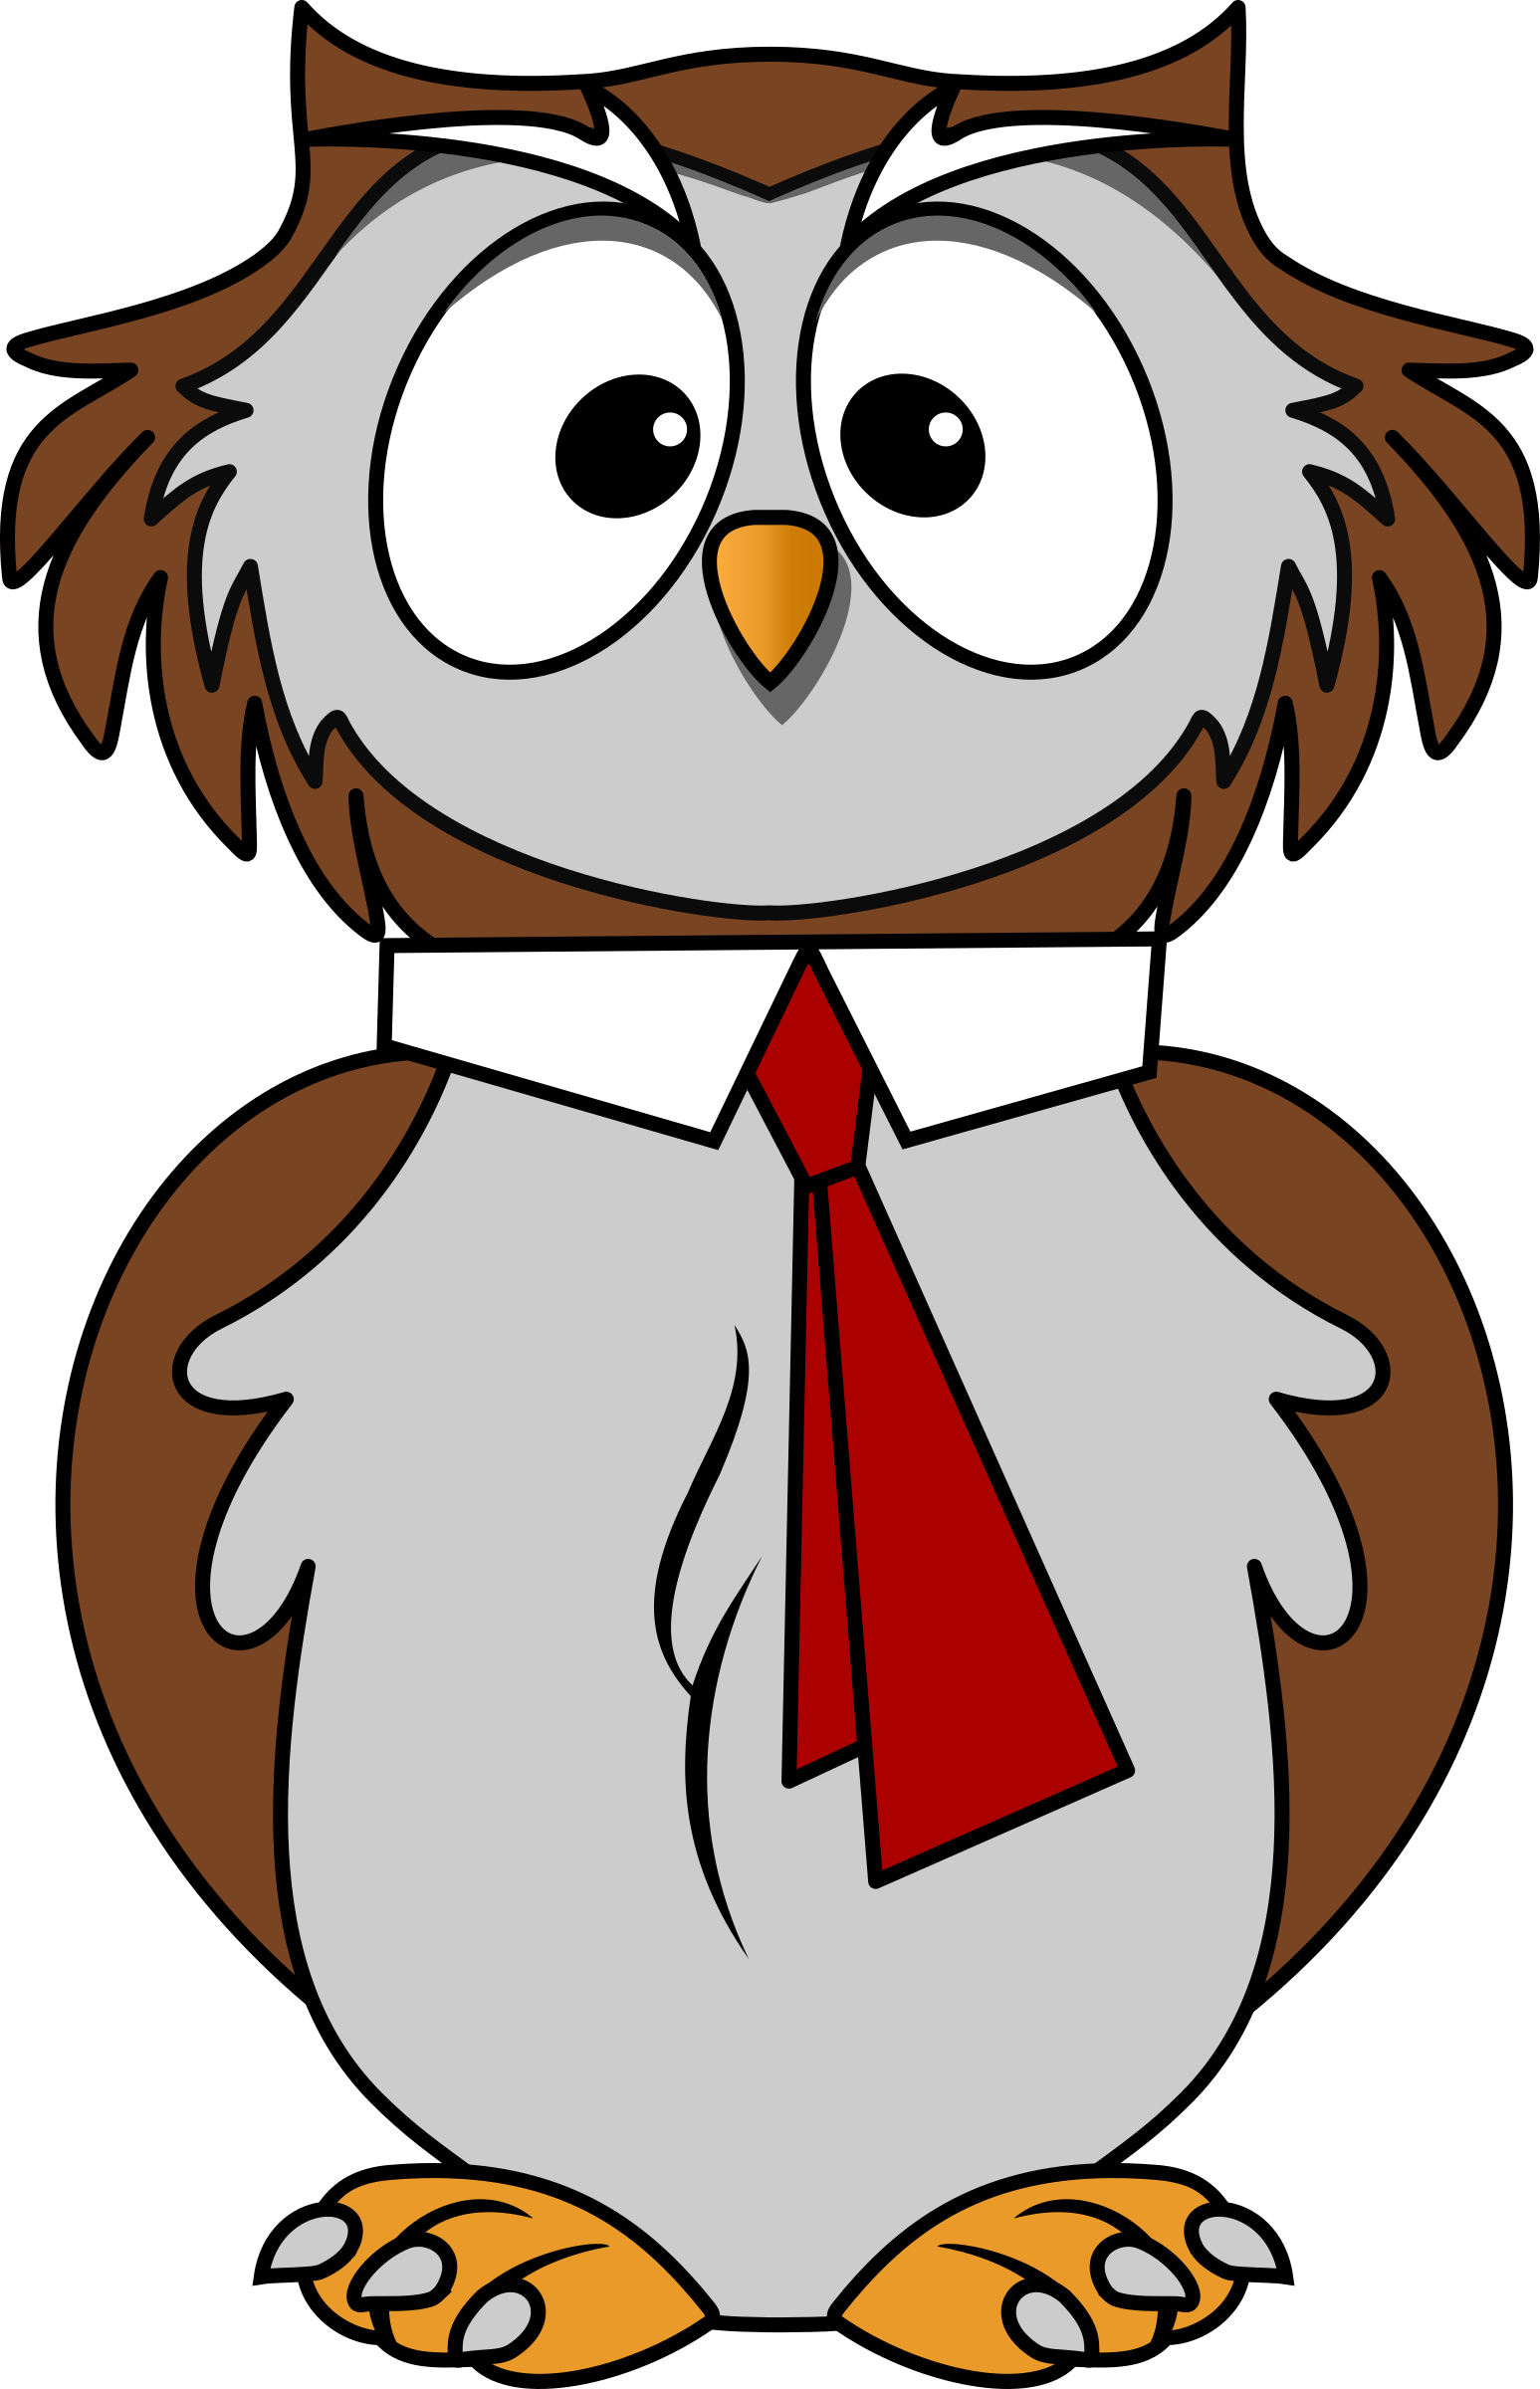 Cute Owl Clipart at GetDrawings.com | Free for personal ...